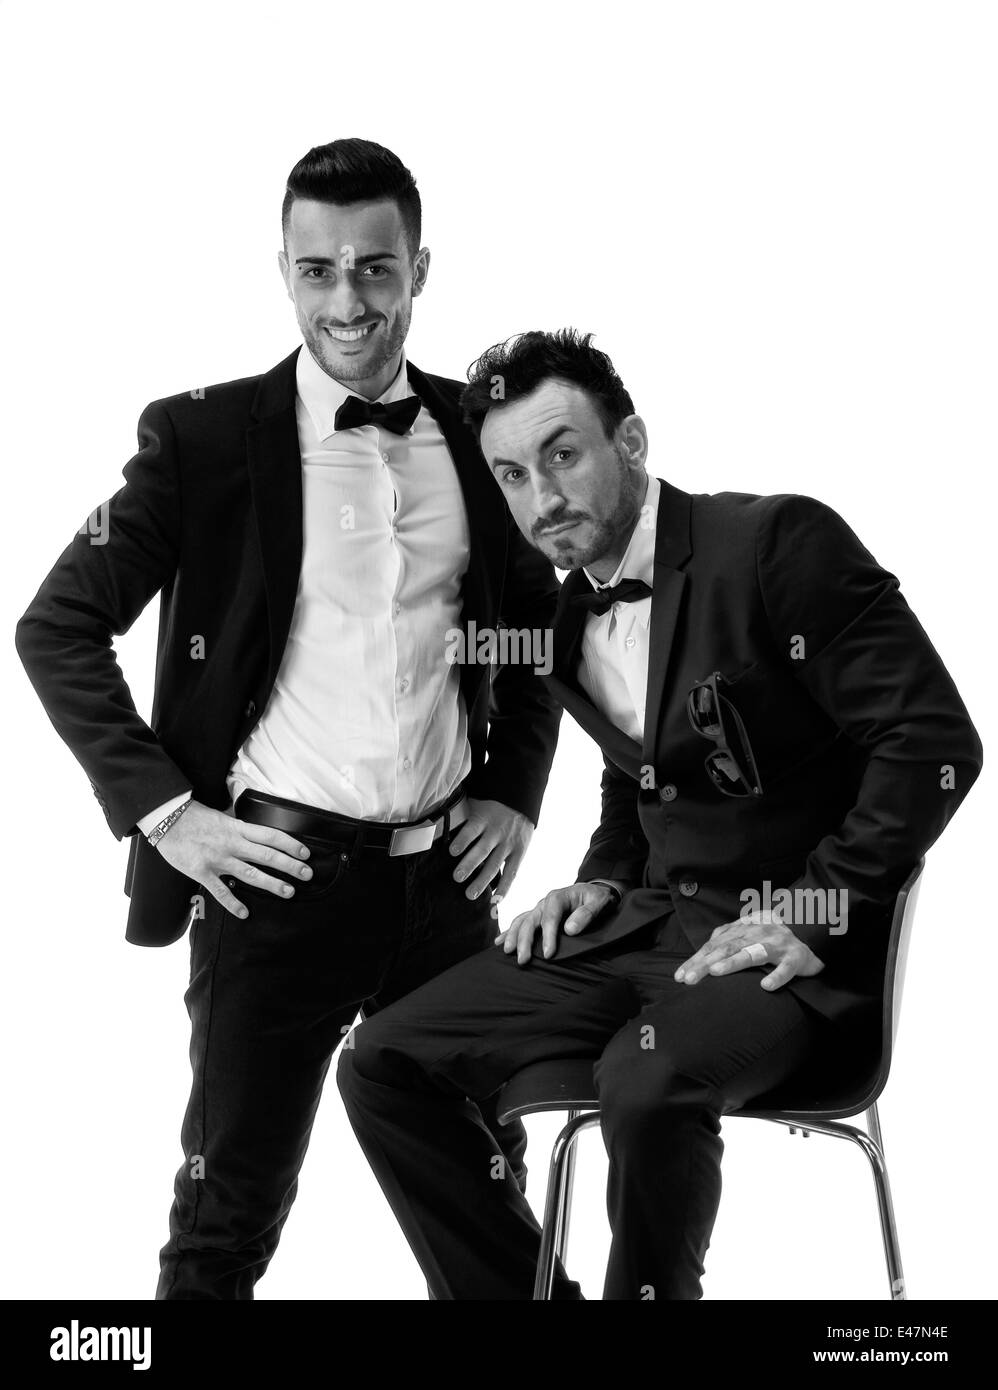 Two elegant men in suit and bowtie isolated on white, one standing, one  sitting Stock Photo - Alamy